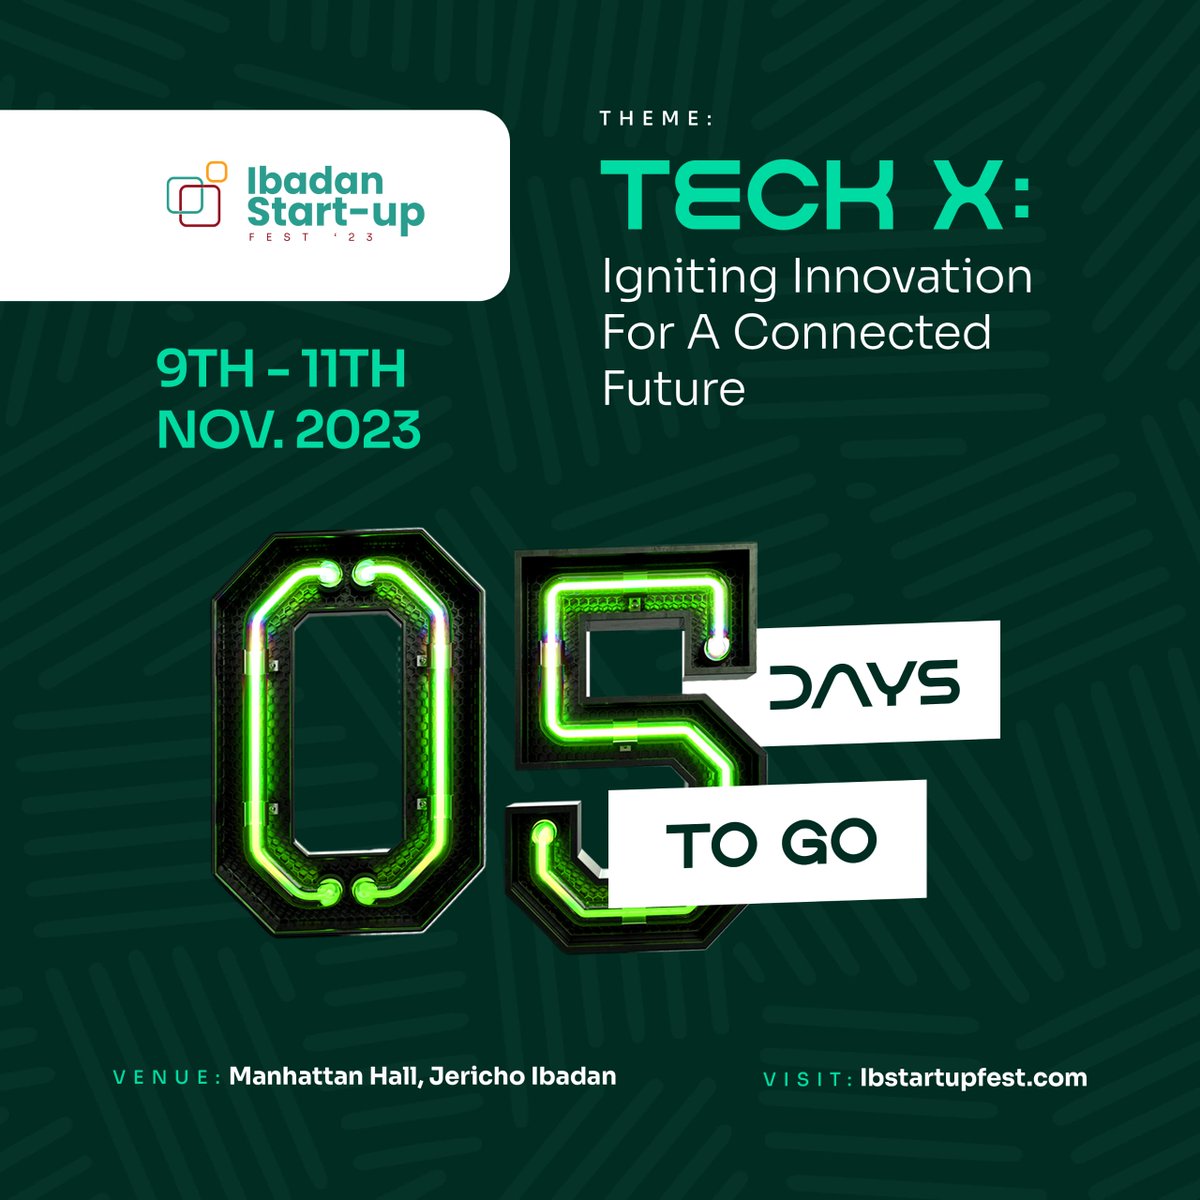 The timer is now running! As we get ready for Ibadan Startup Fest, a center of creativity, disruption, and endless possibilities, excitement is growing. Be part of the revolution!   @ibstartupfest  

#ibadanstartupfest23 #PacesetterState #ProudlyOyo #ibadan #Oyo state